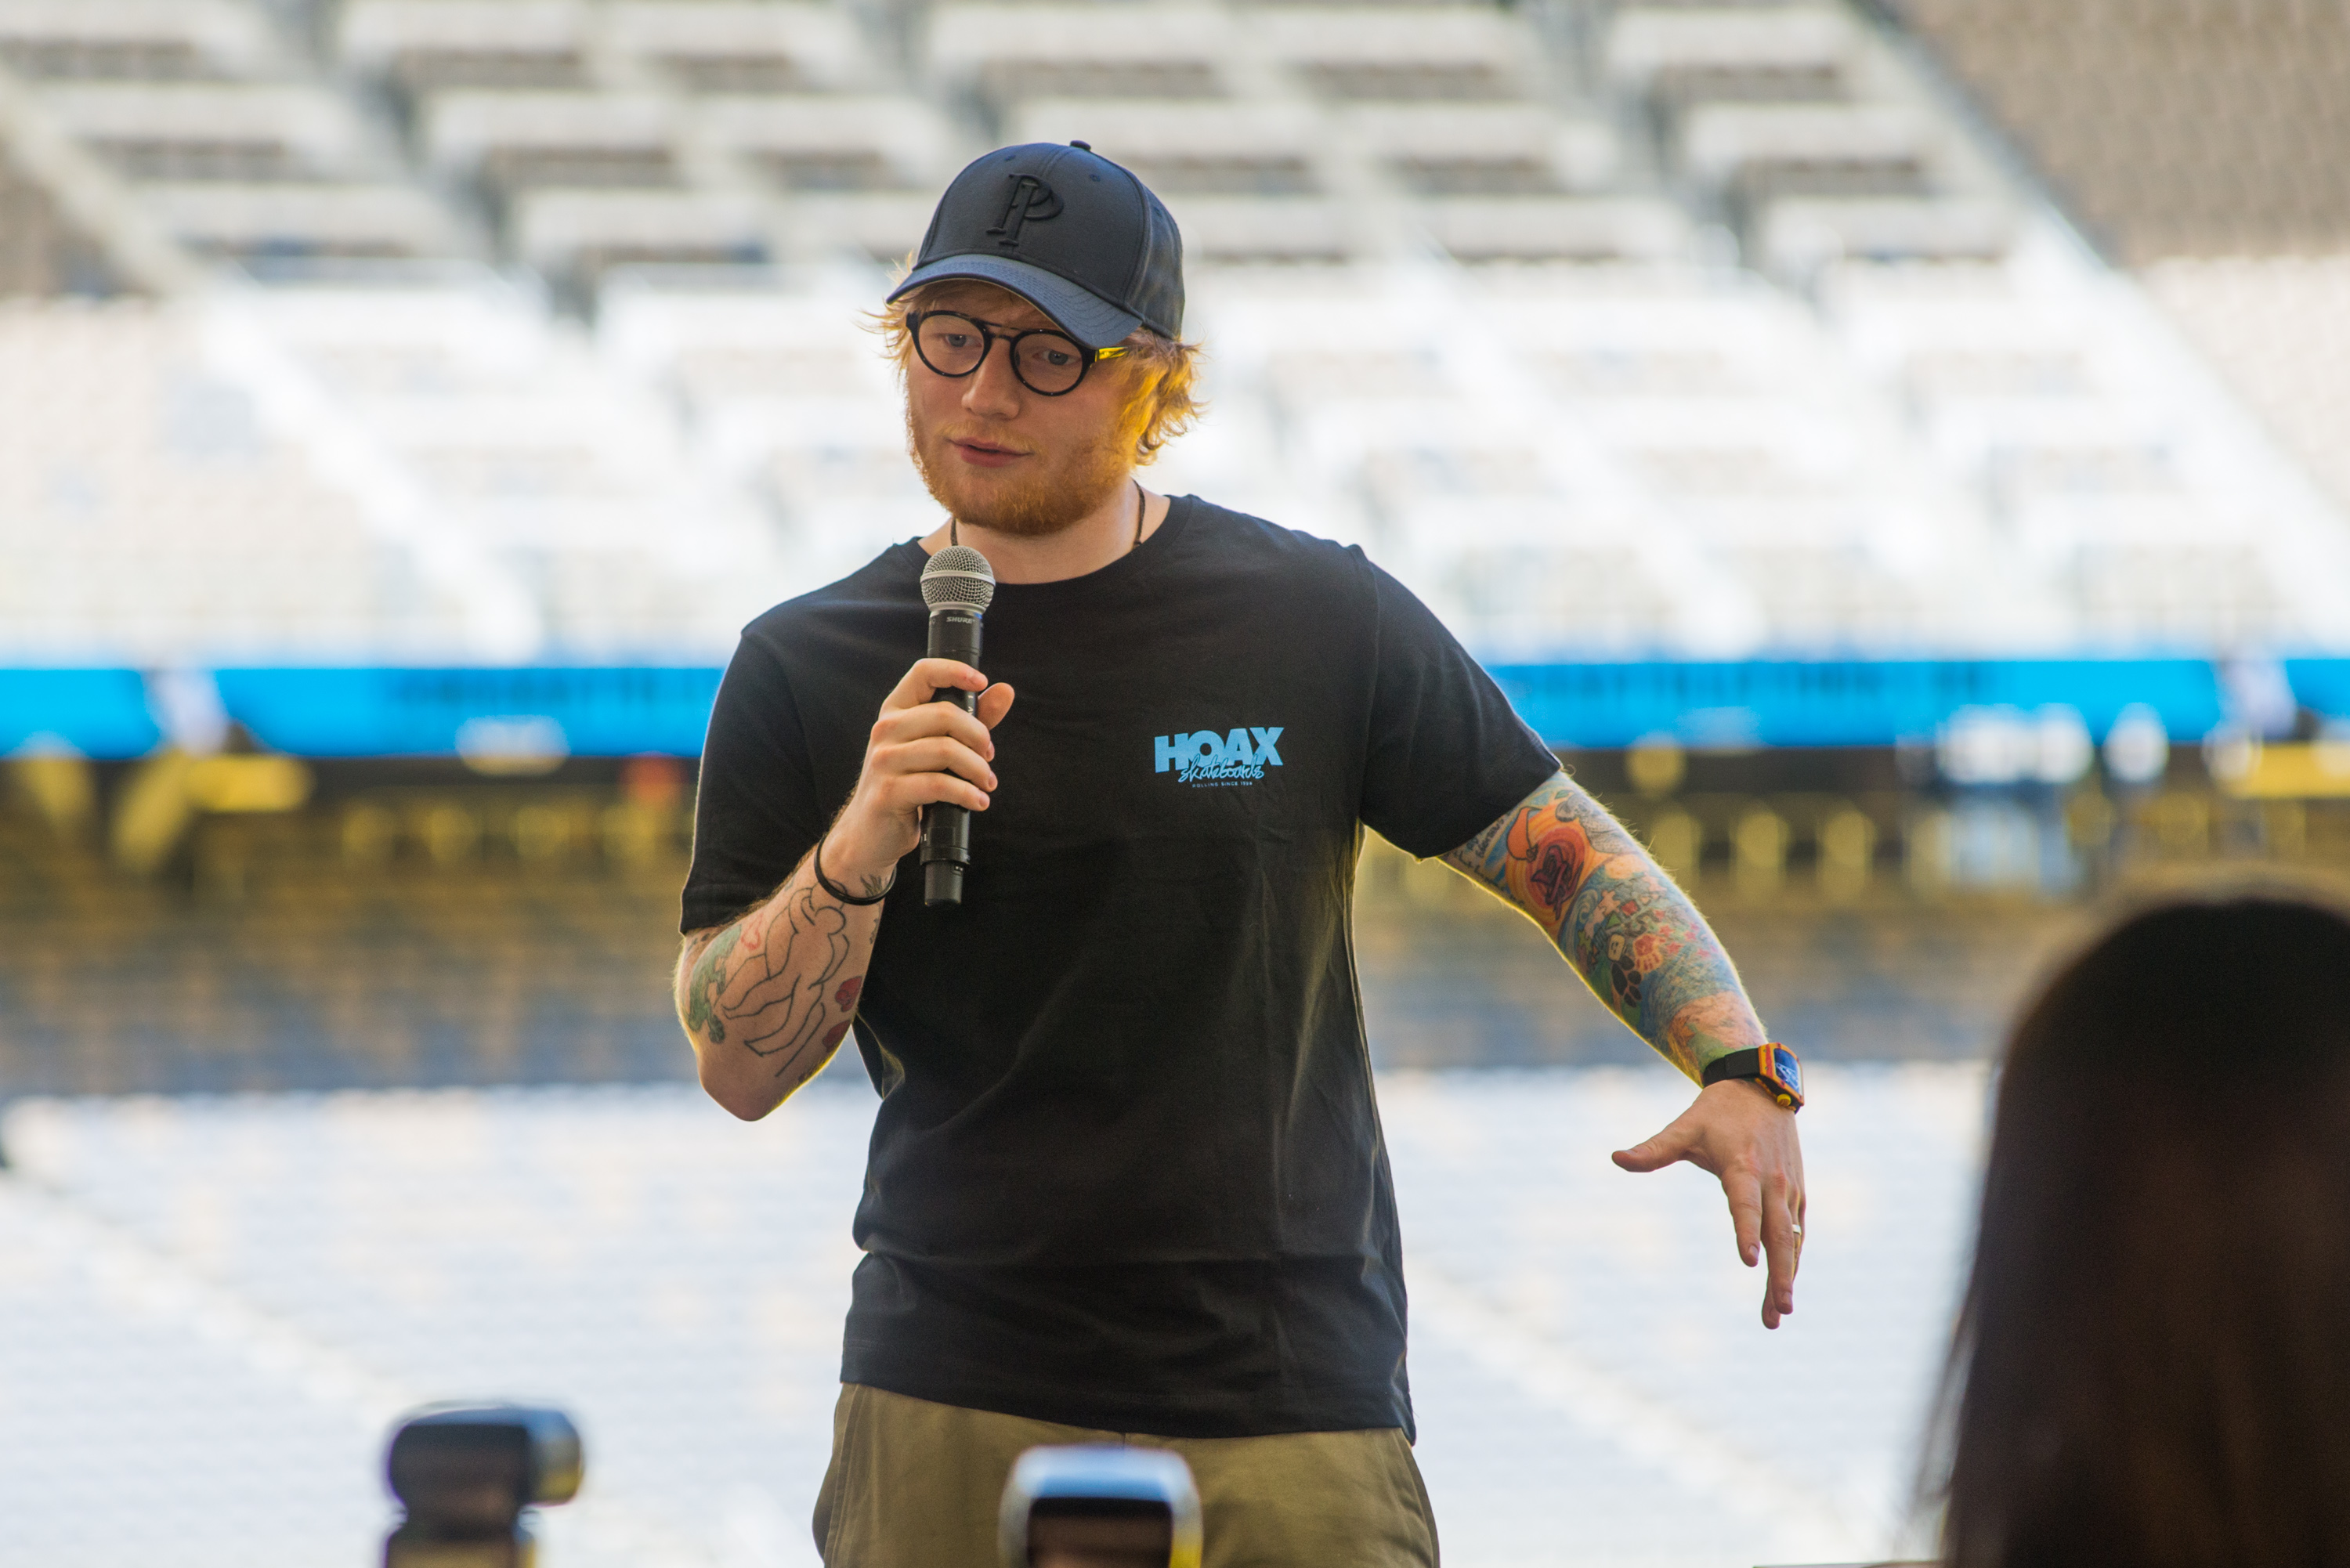 Ed Sheeran on selling 1 million tickets in Australia, NZ: “Weird to have one in 23 people come…”